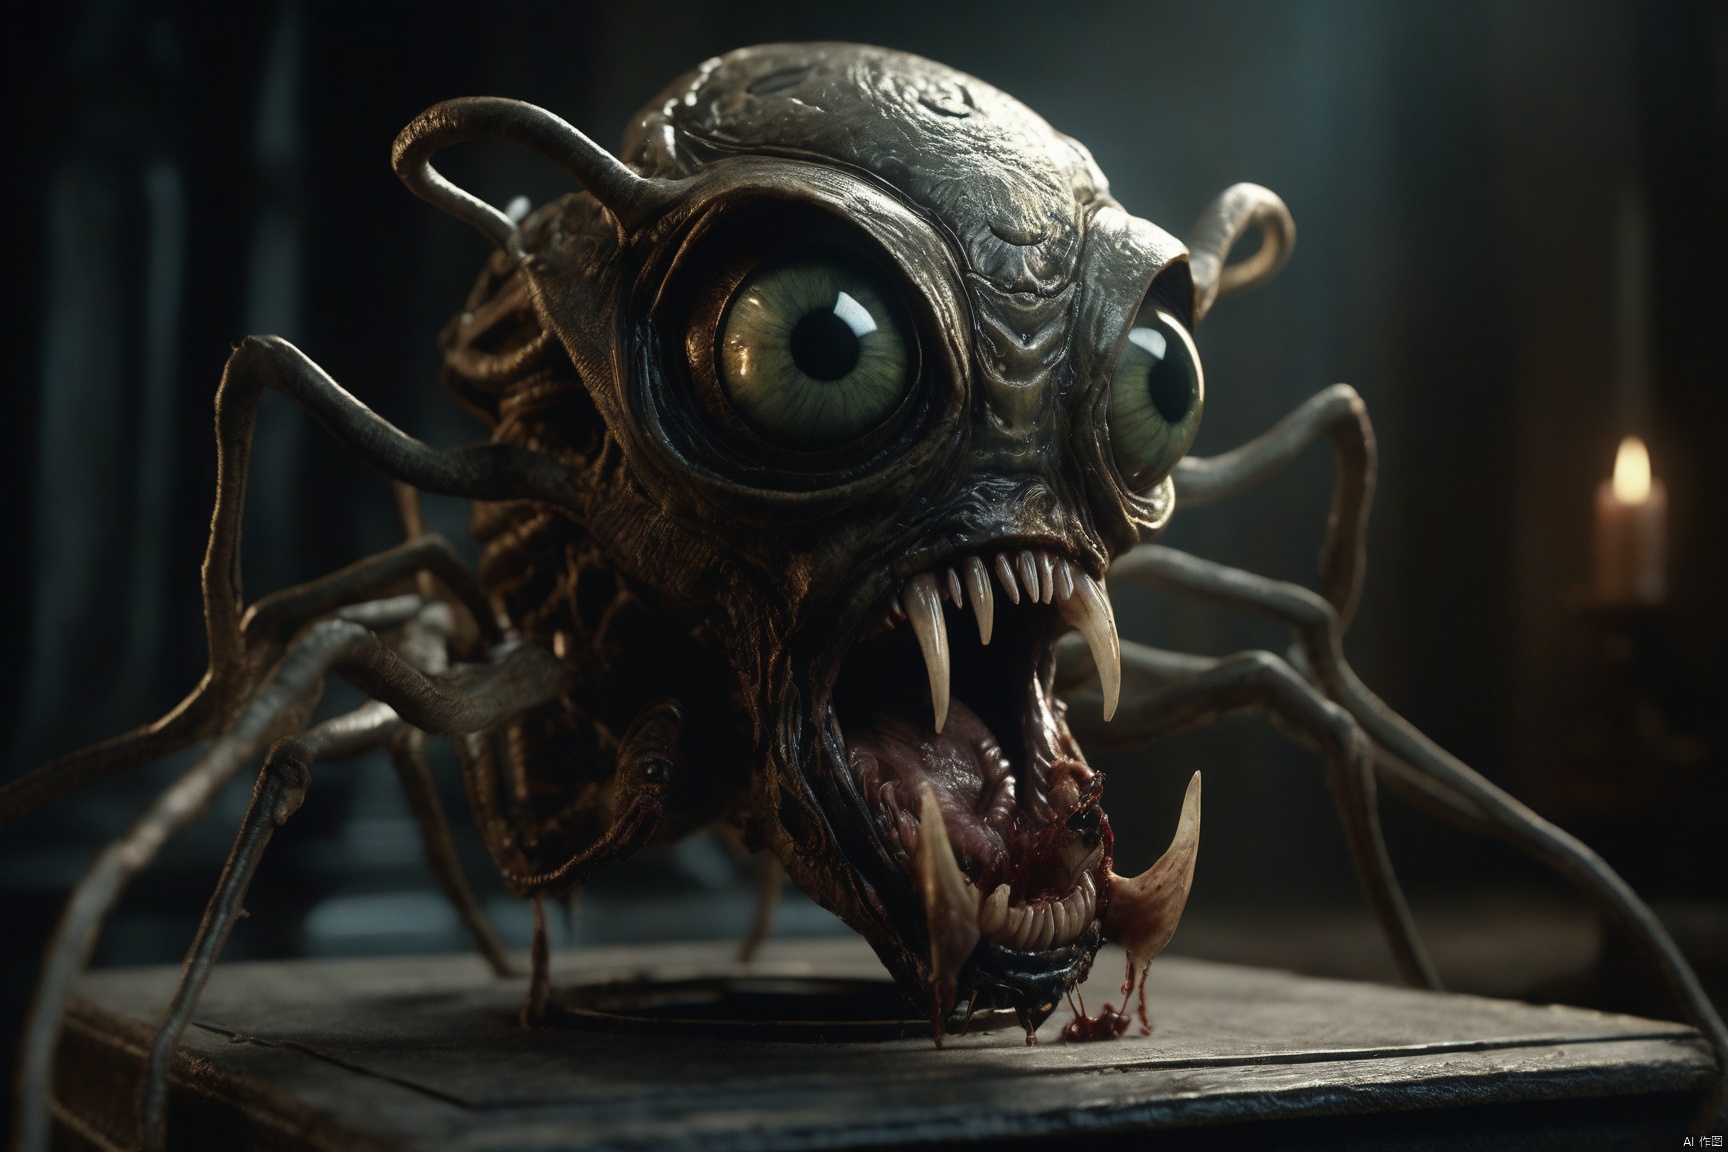  movie still of professional 3d model Horror-themed photo depicting an ancient eldritch device that rips reality apart to let unspeakable horrors seep into out reality, drooling insectoid head . Eerie, unsettling, dark, spooky, suspenseful, grim, highly detailed . octane render, highly detailed, volumetric, dramatic lighting